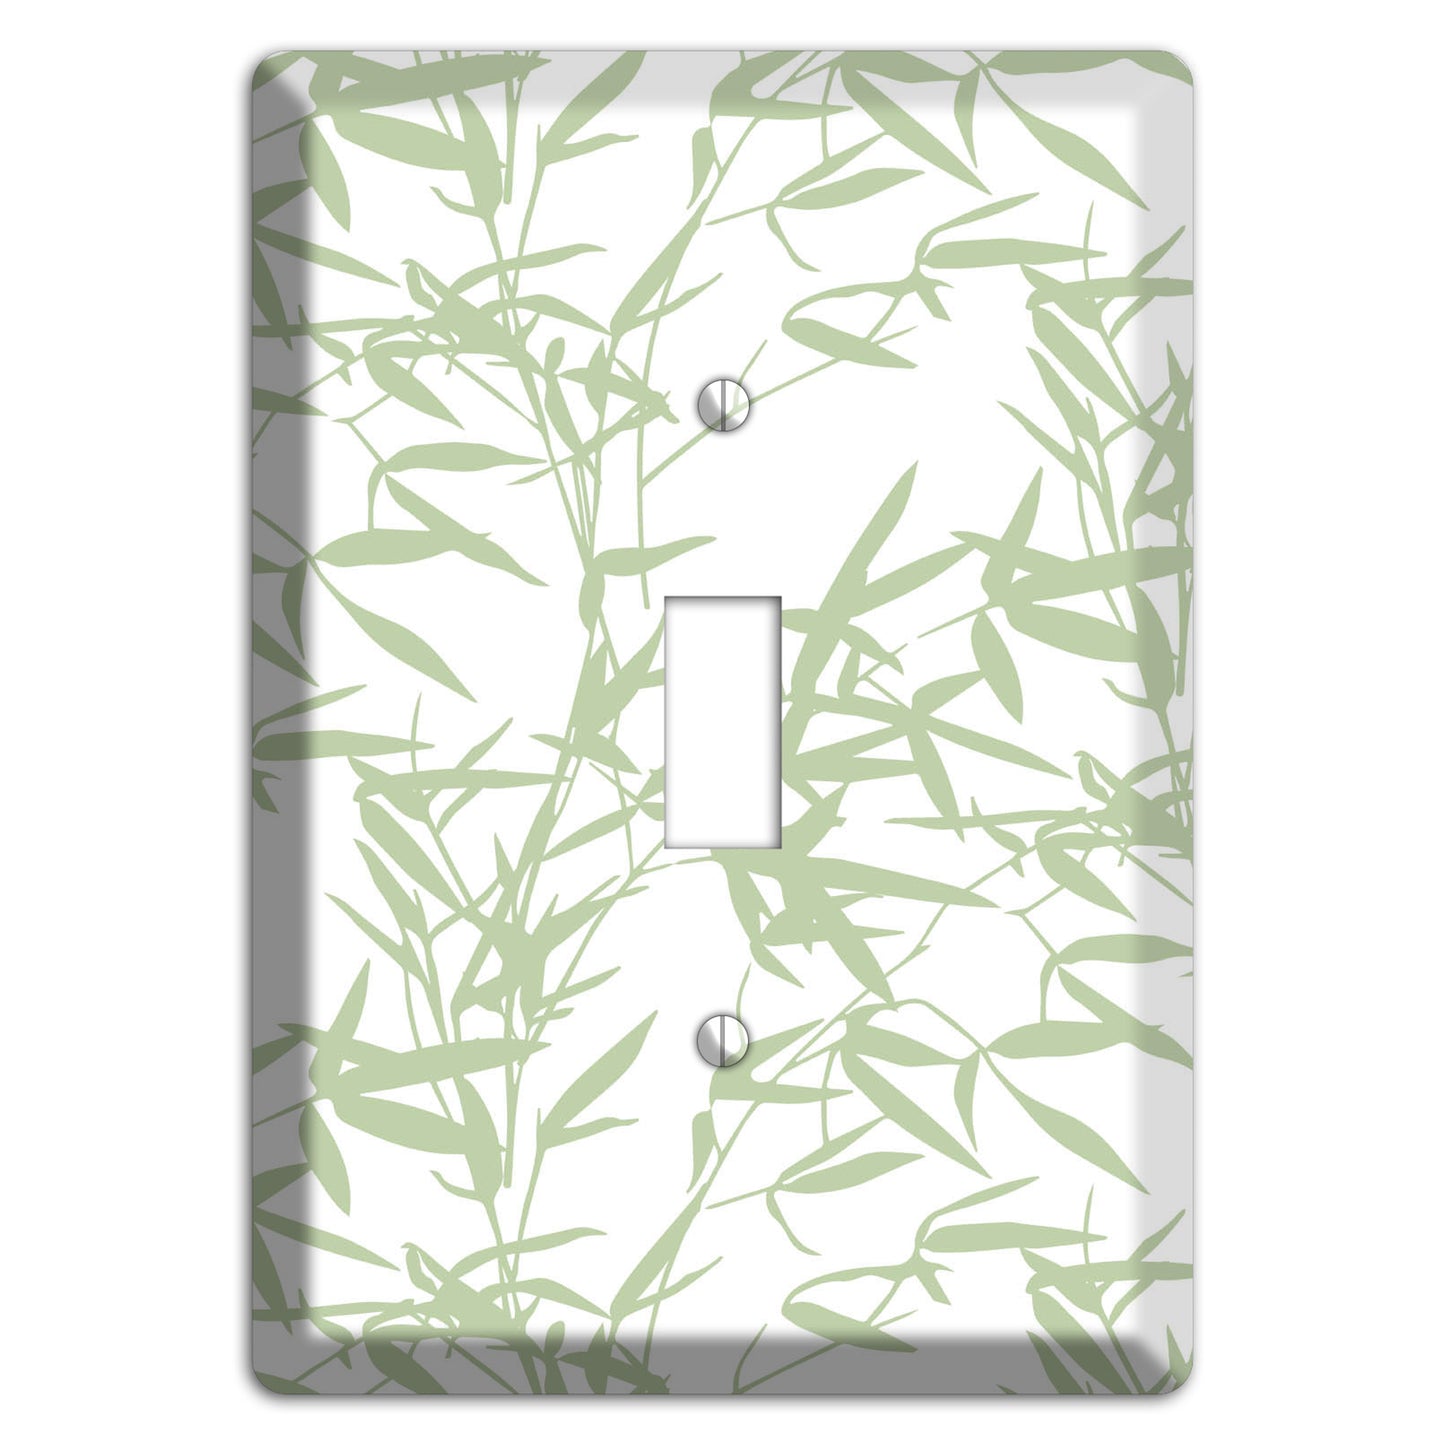 Leaves Style P Cover Plates